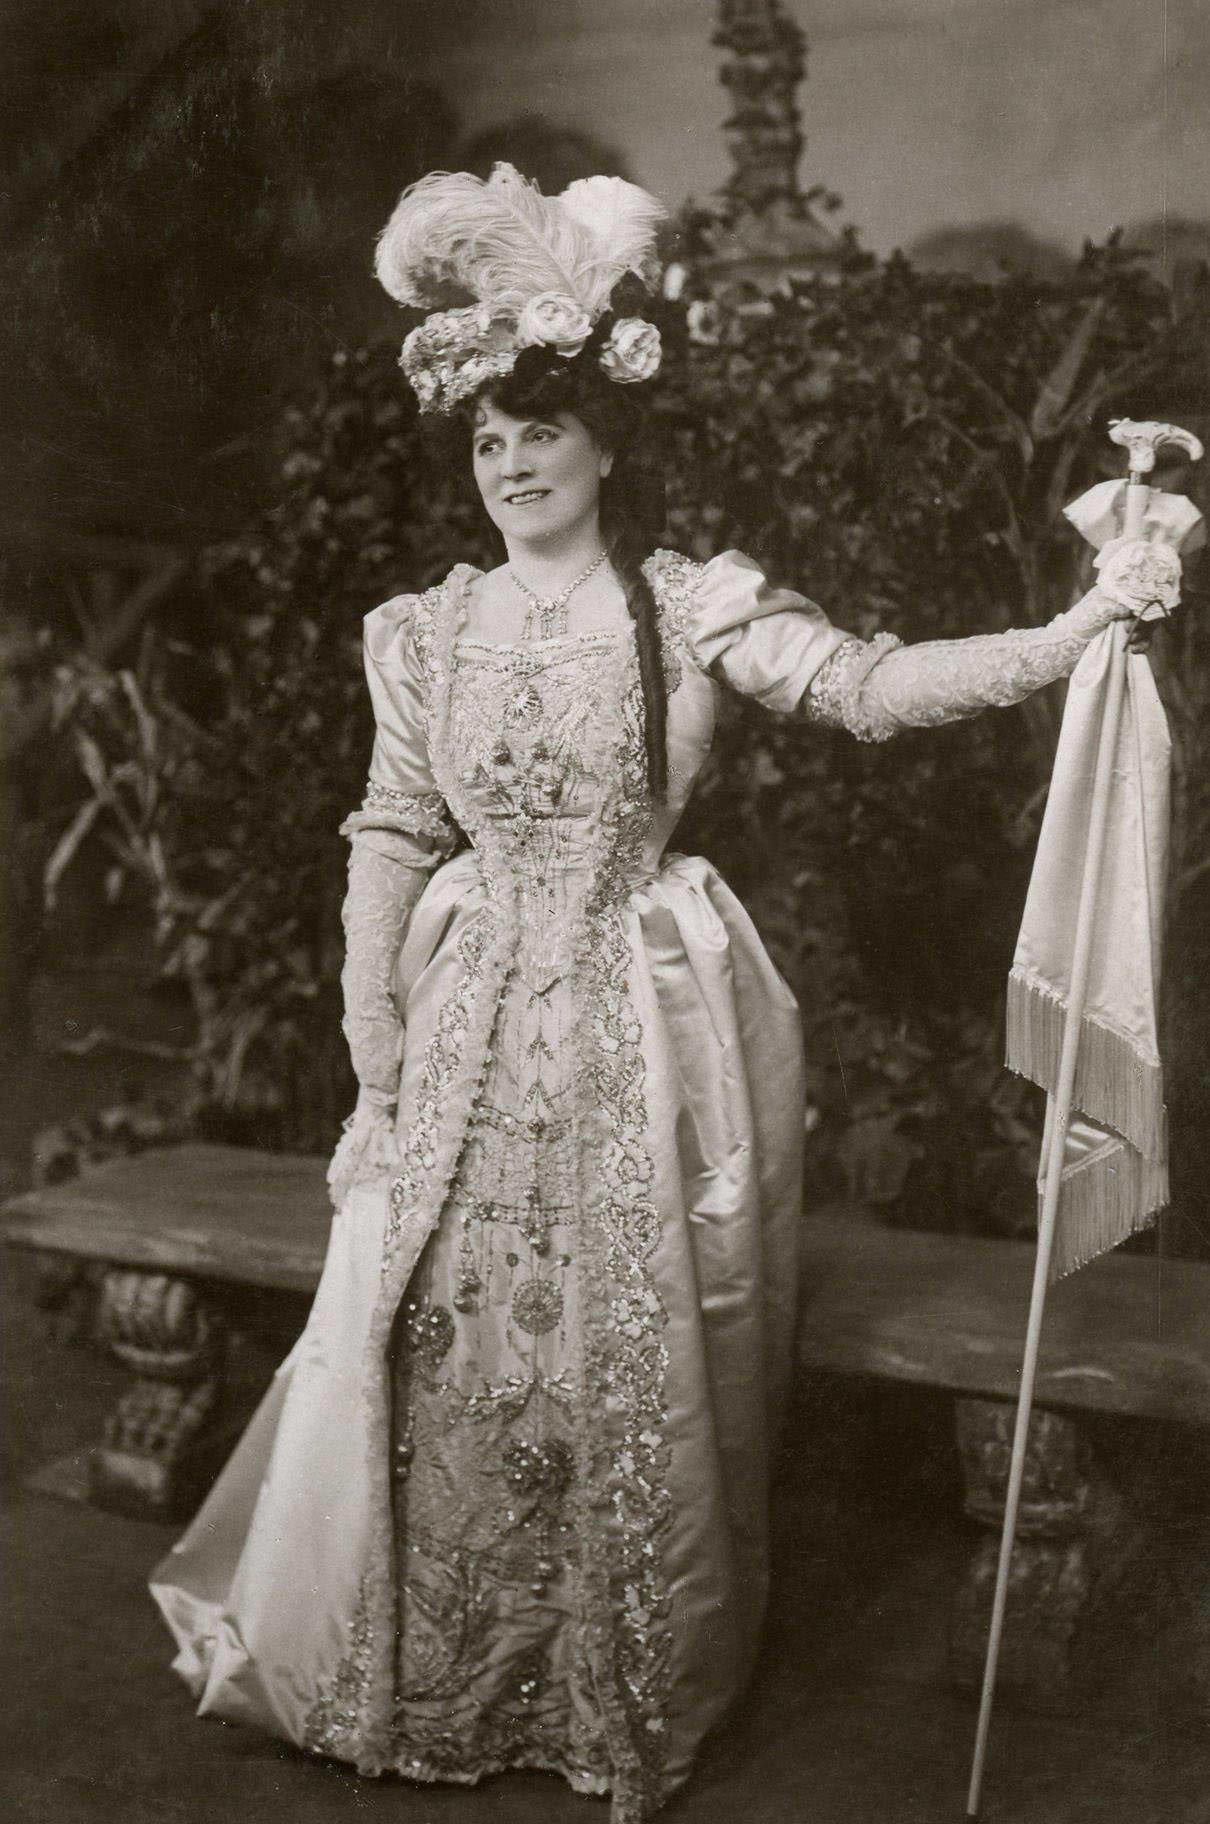 An Edwardian lady radiates beauty and grace in her fashionable hat